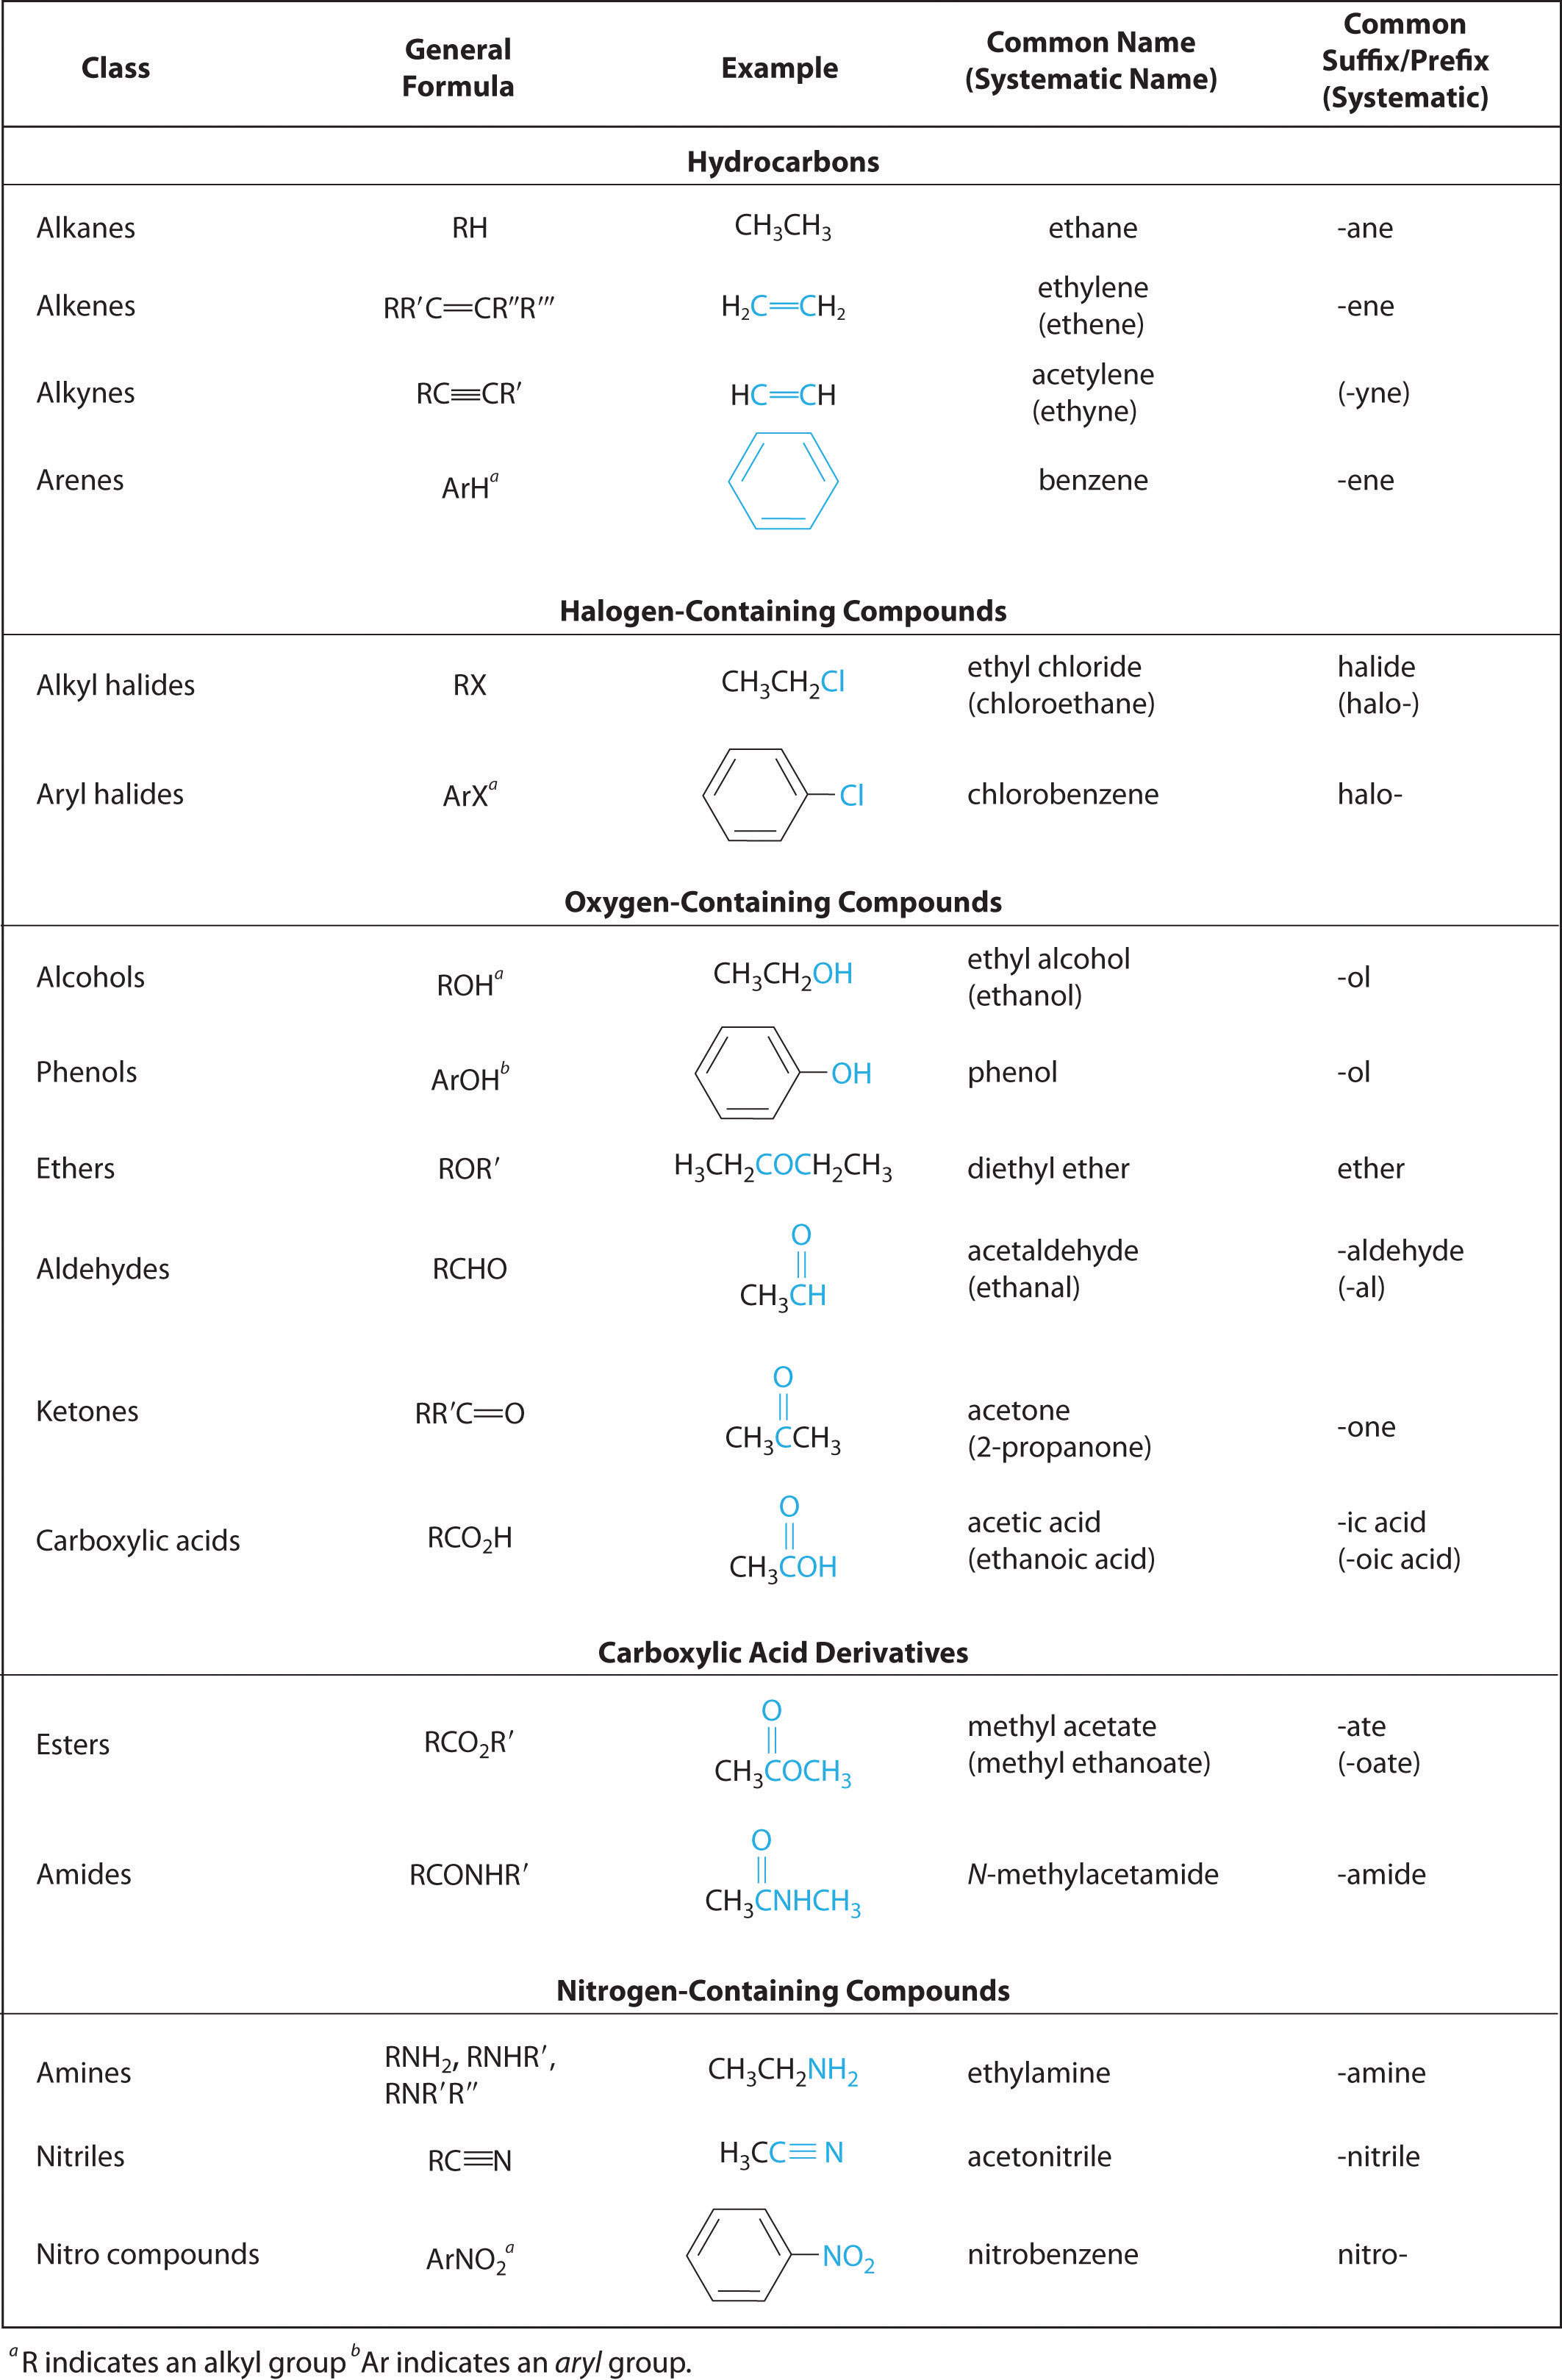 There are a lot of functional groups and this image shows just how 